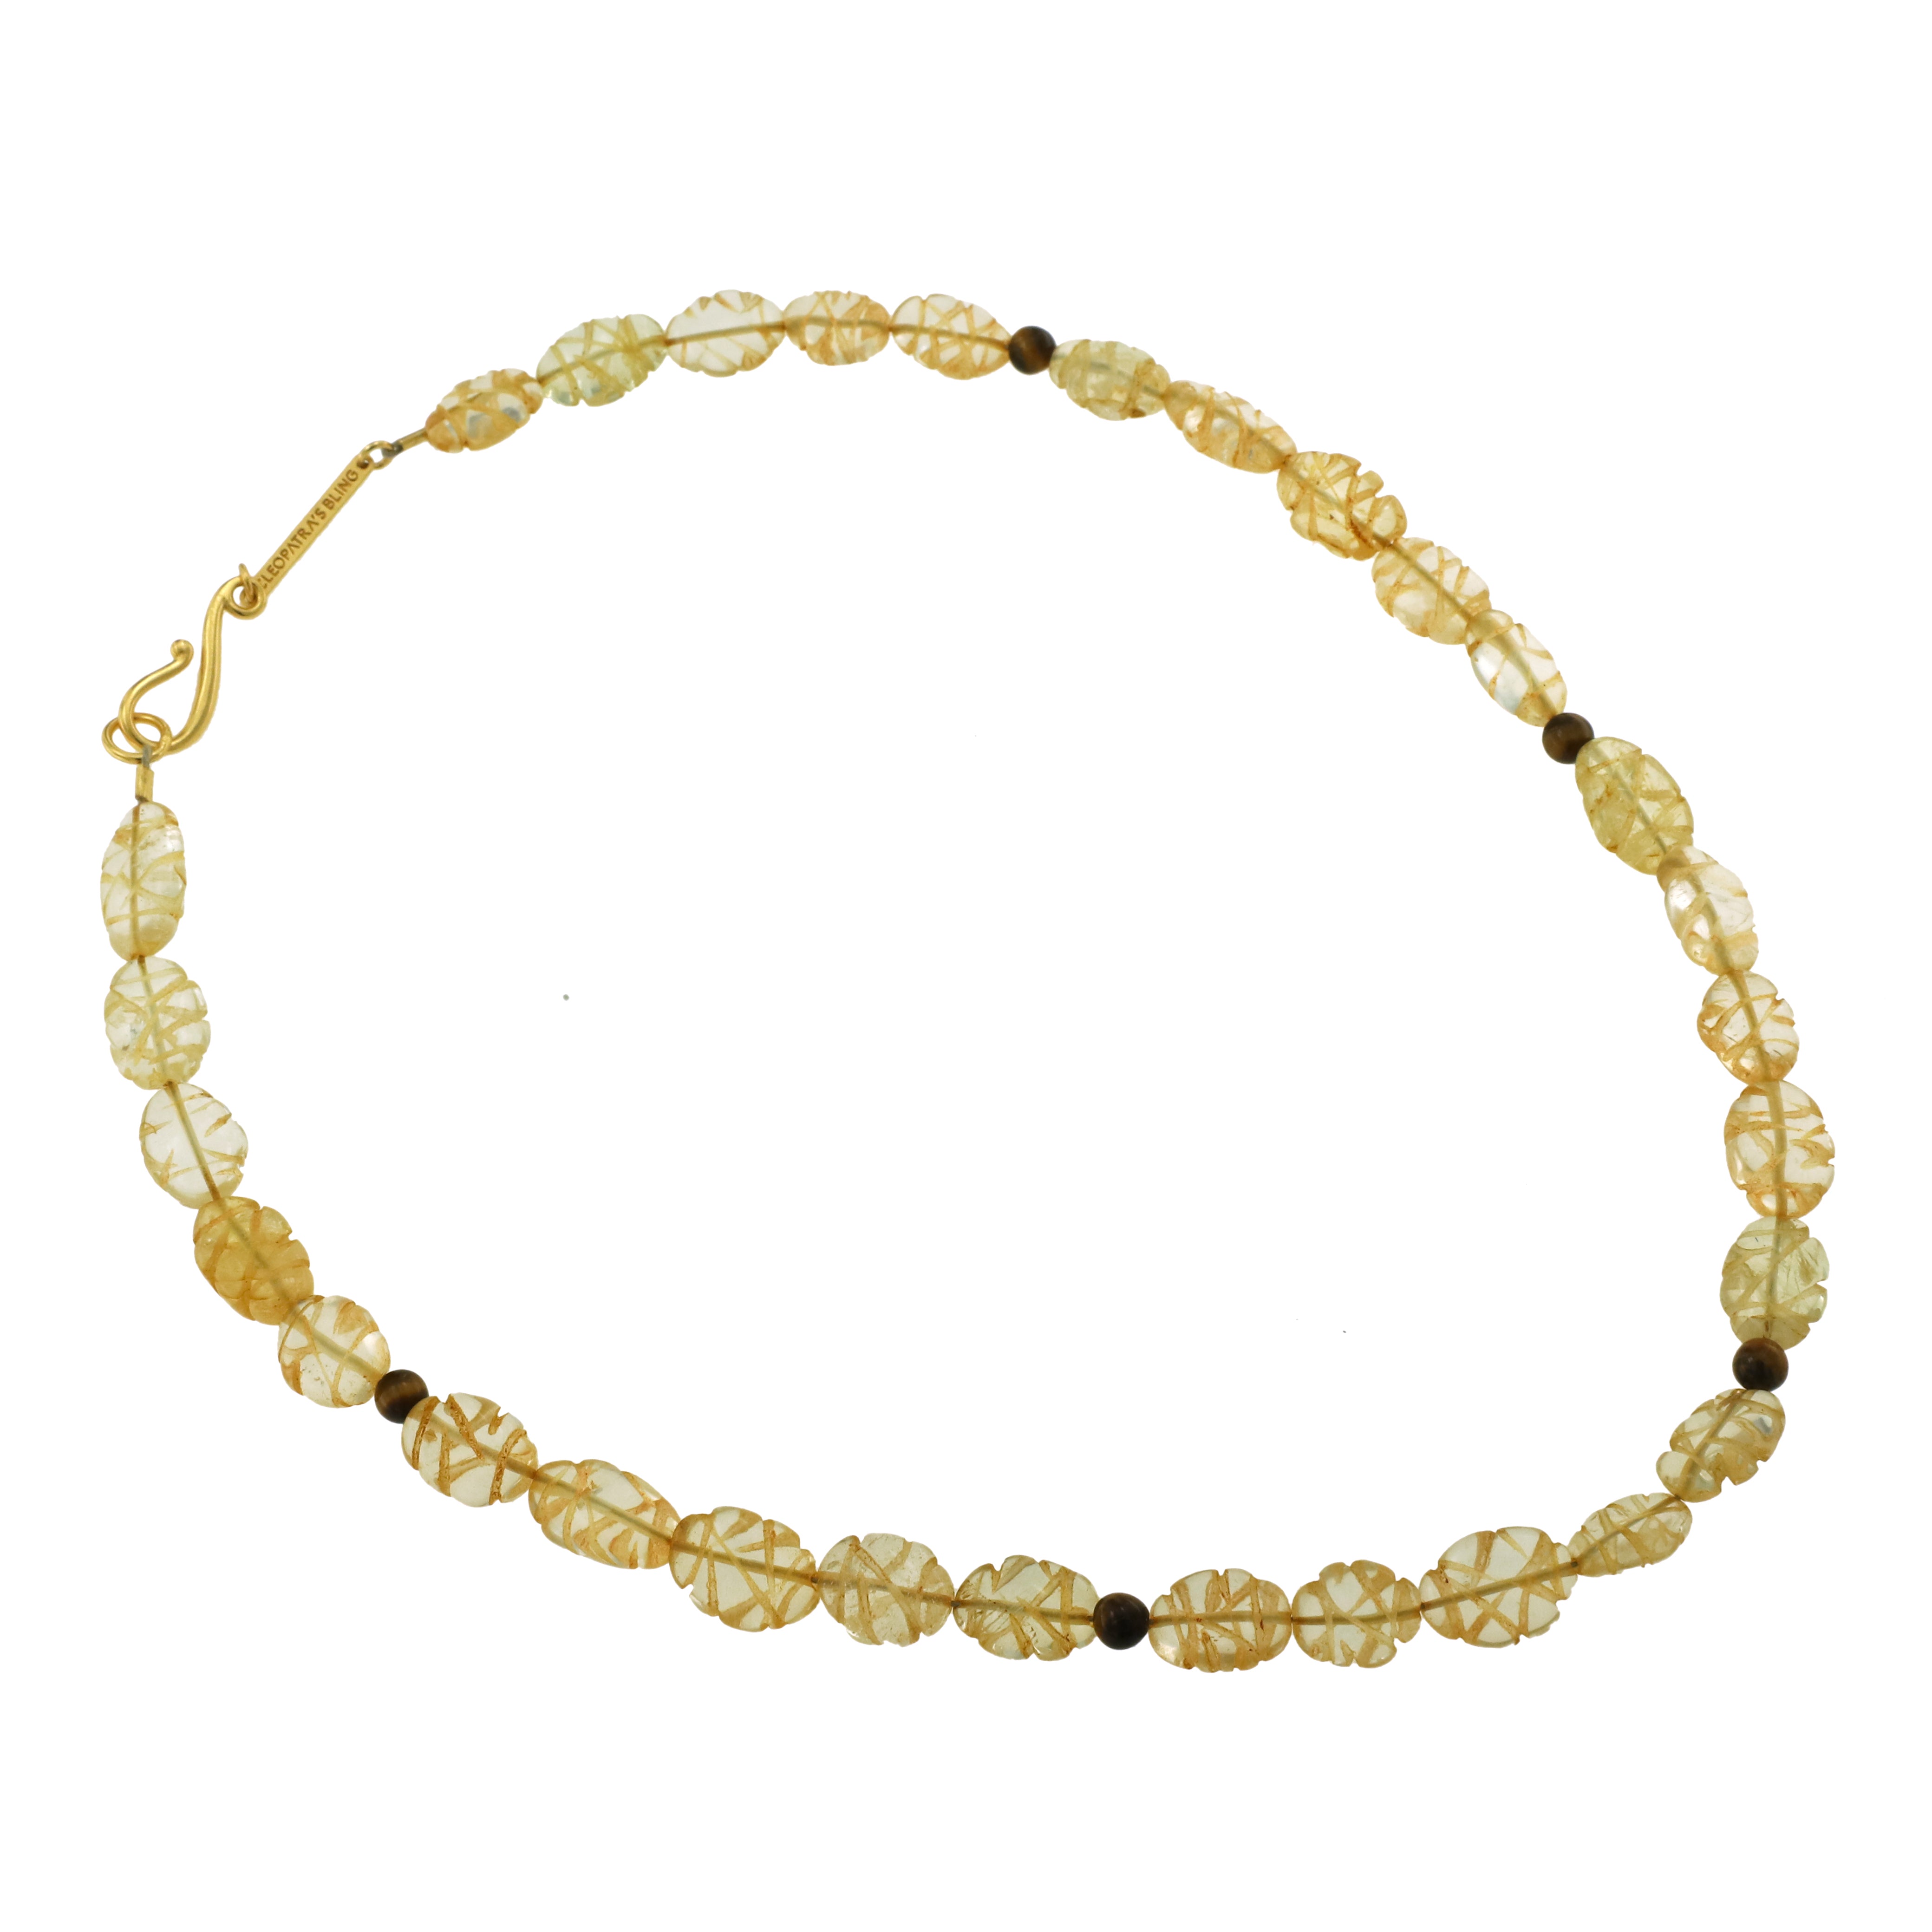 CO.NK.120 Necklace – 18K Gold Plated